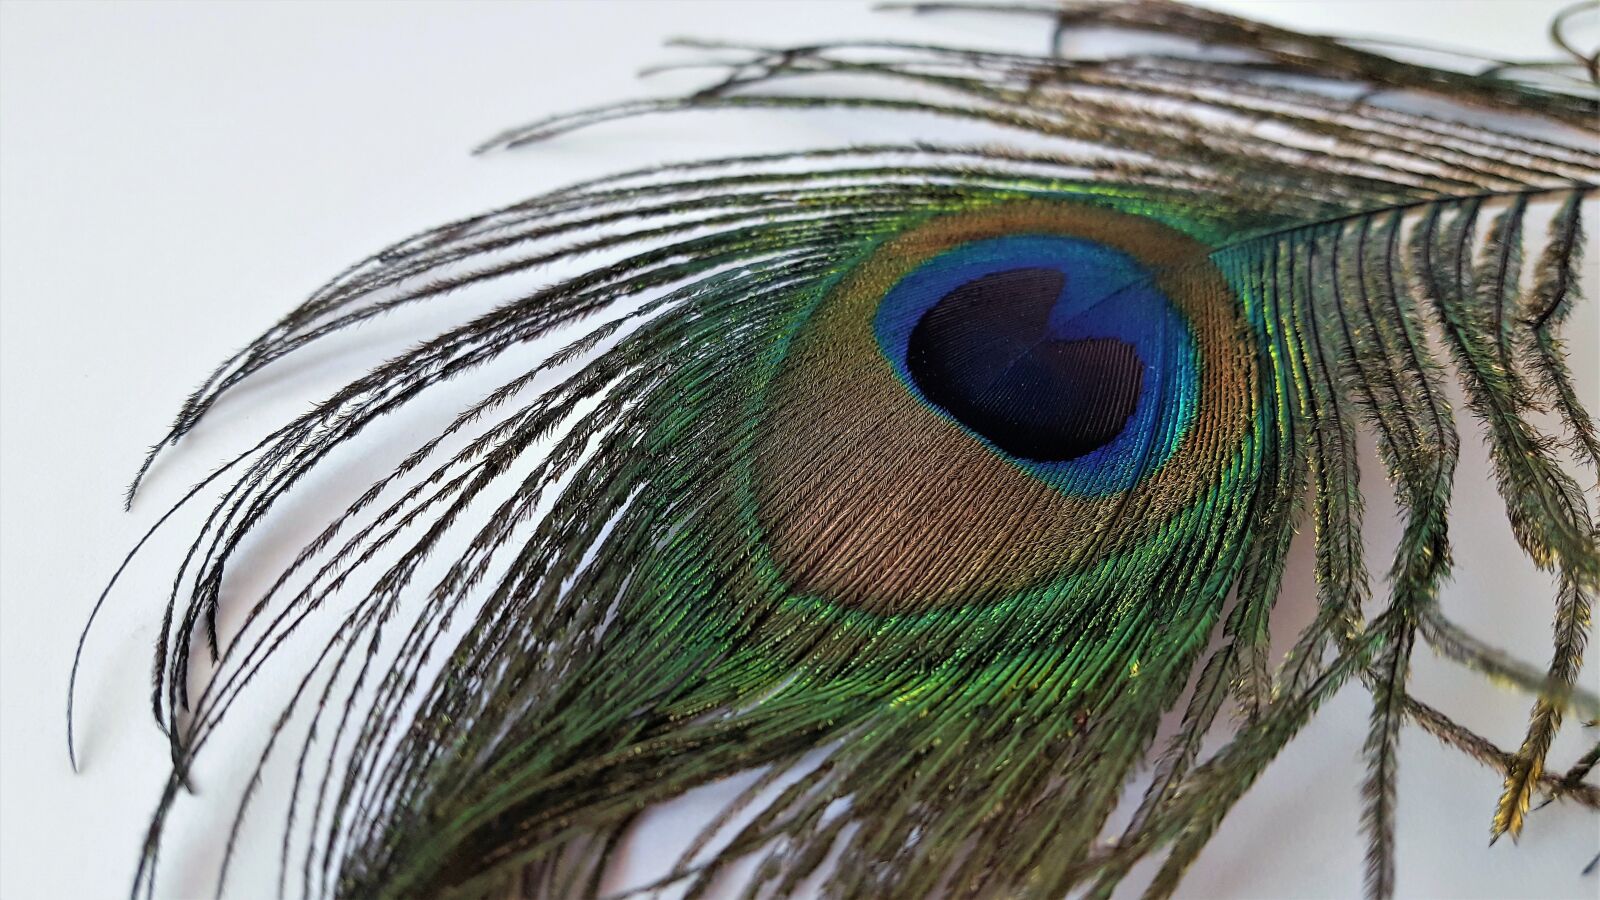 Samsung Galaxy S6 sample photo. Feather, feathers, peacock photography